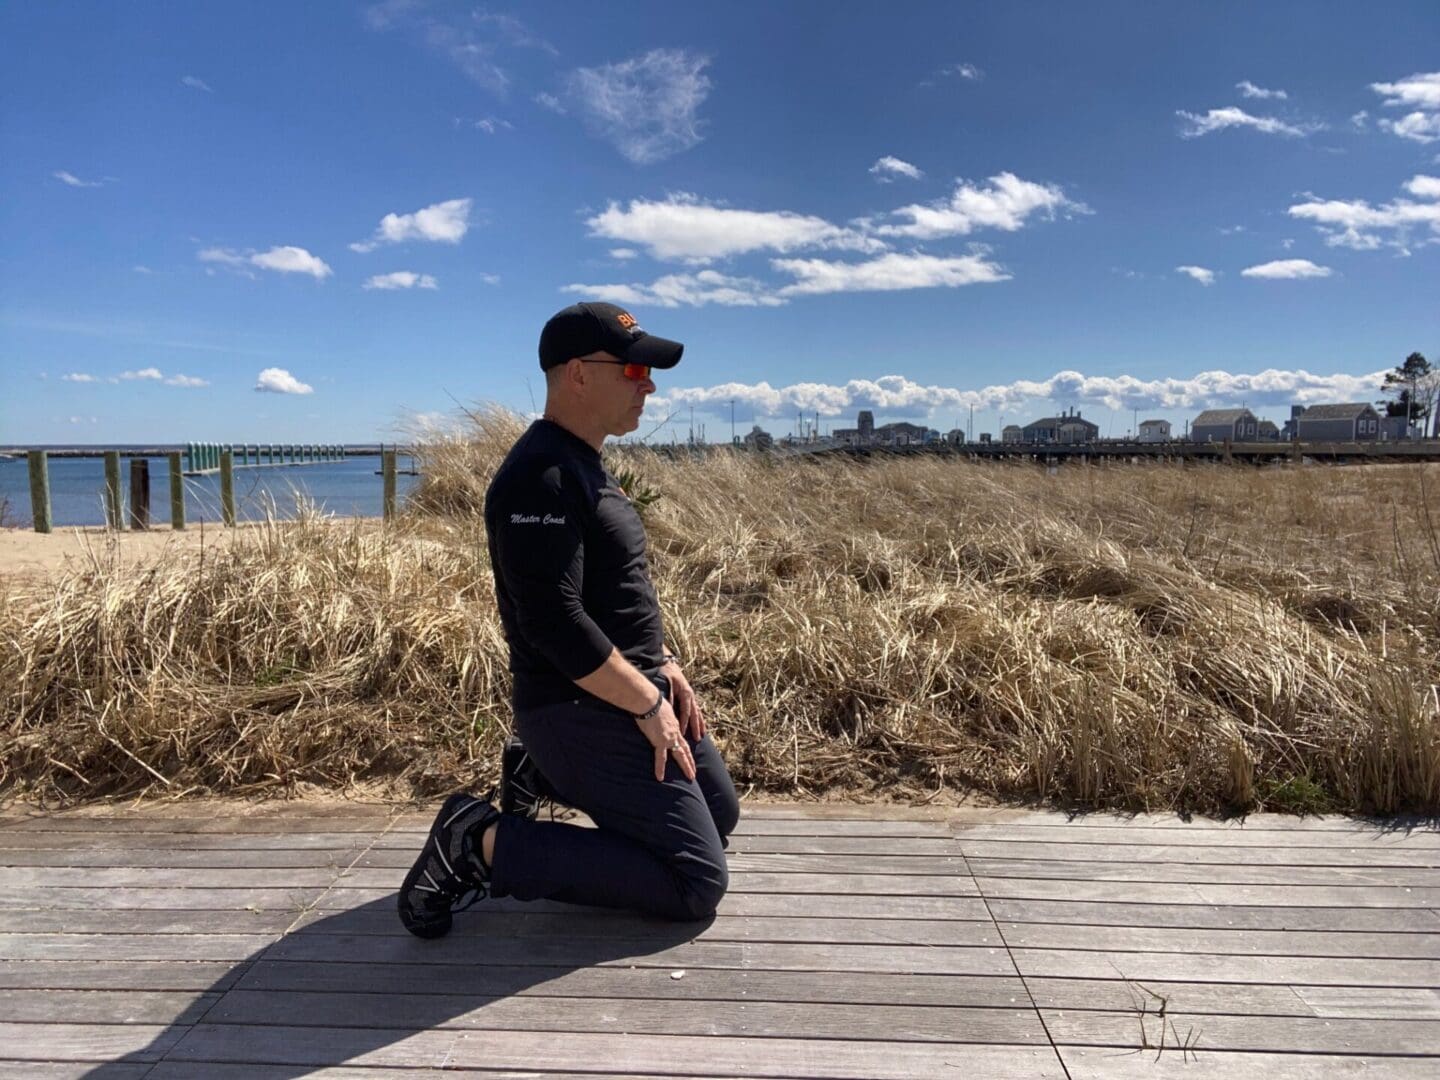 A man exercising, kneeling on a boardwalk next to a body of water.